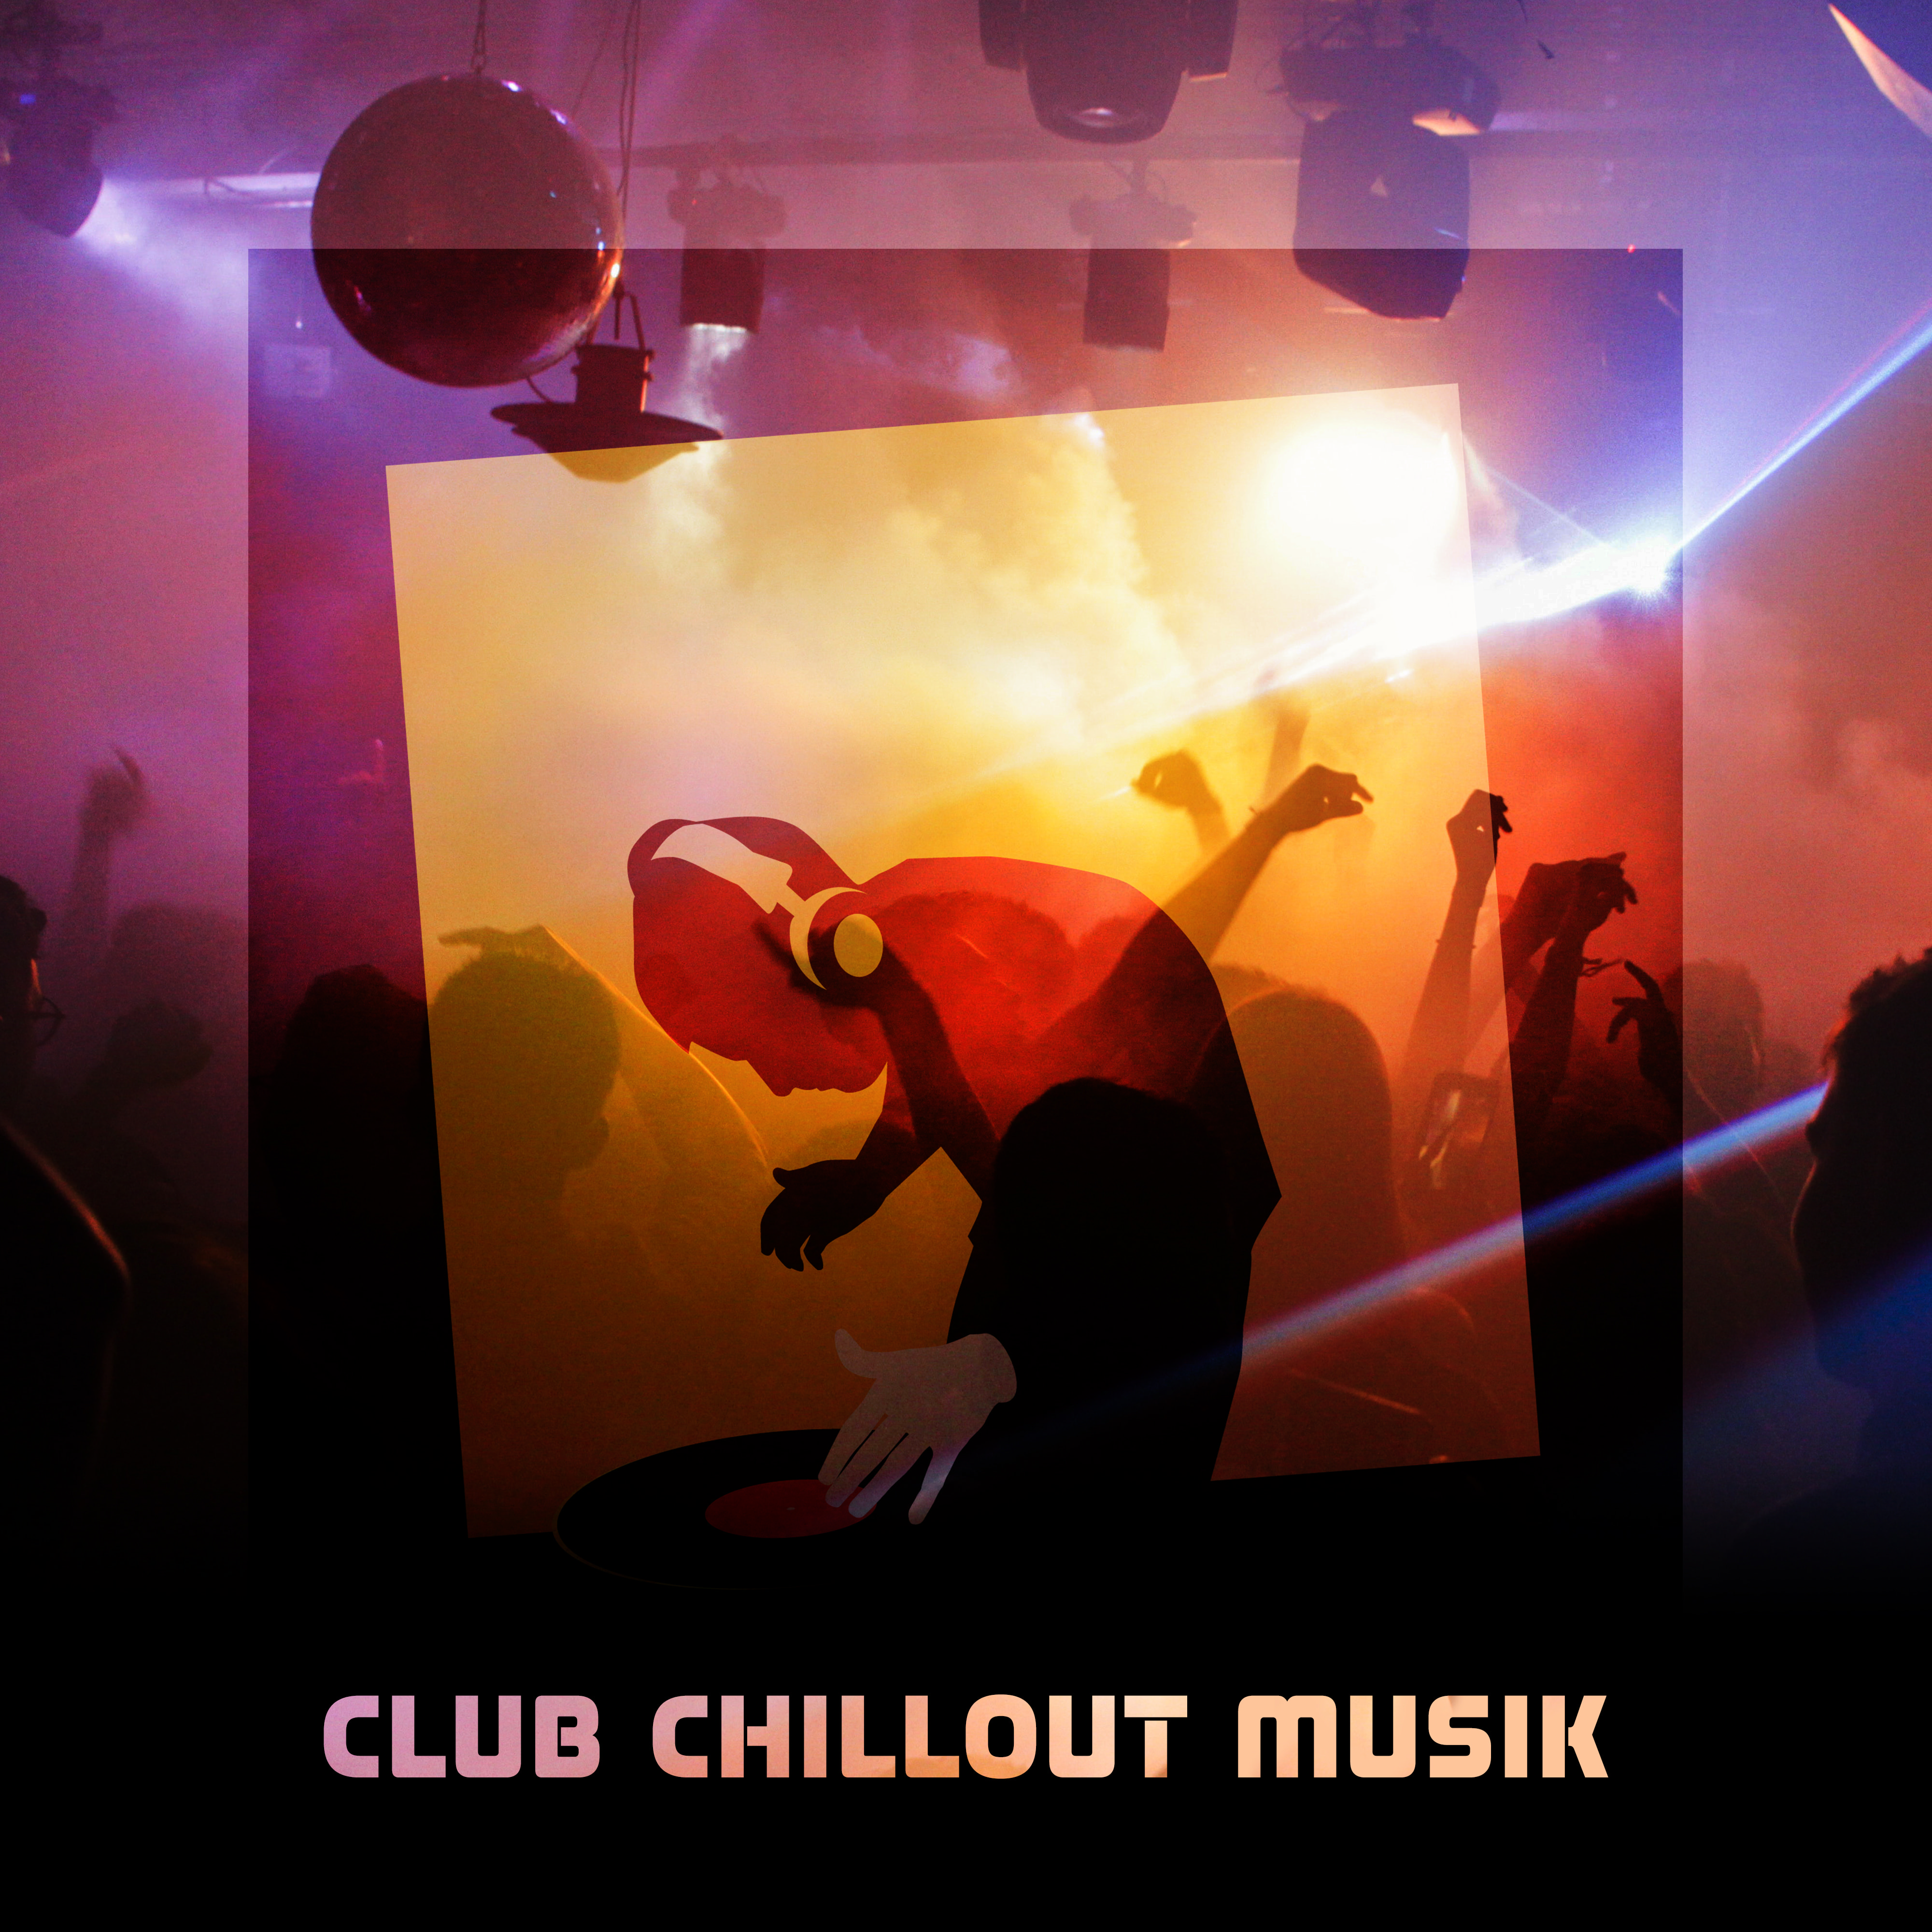 Club Chillout Musik